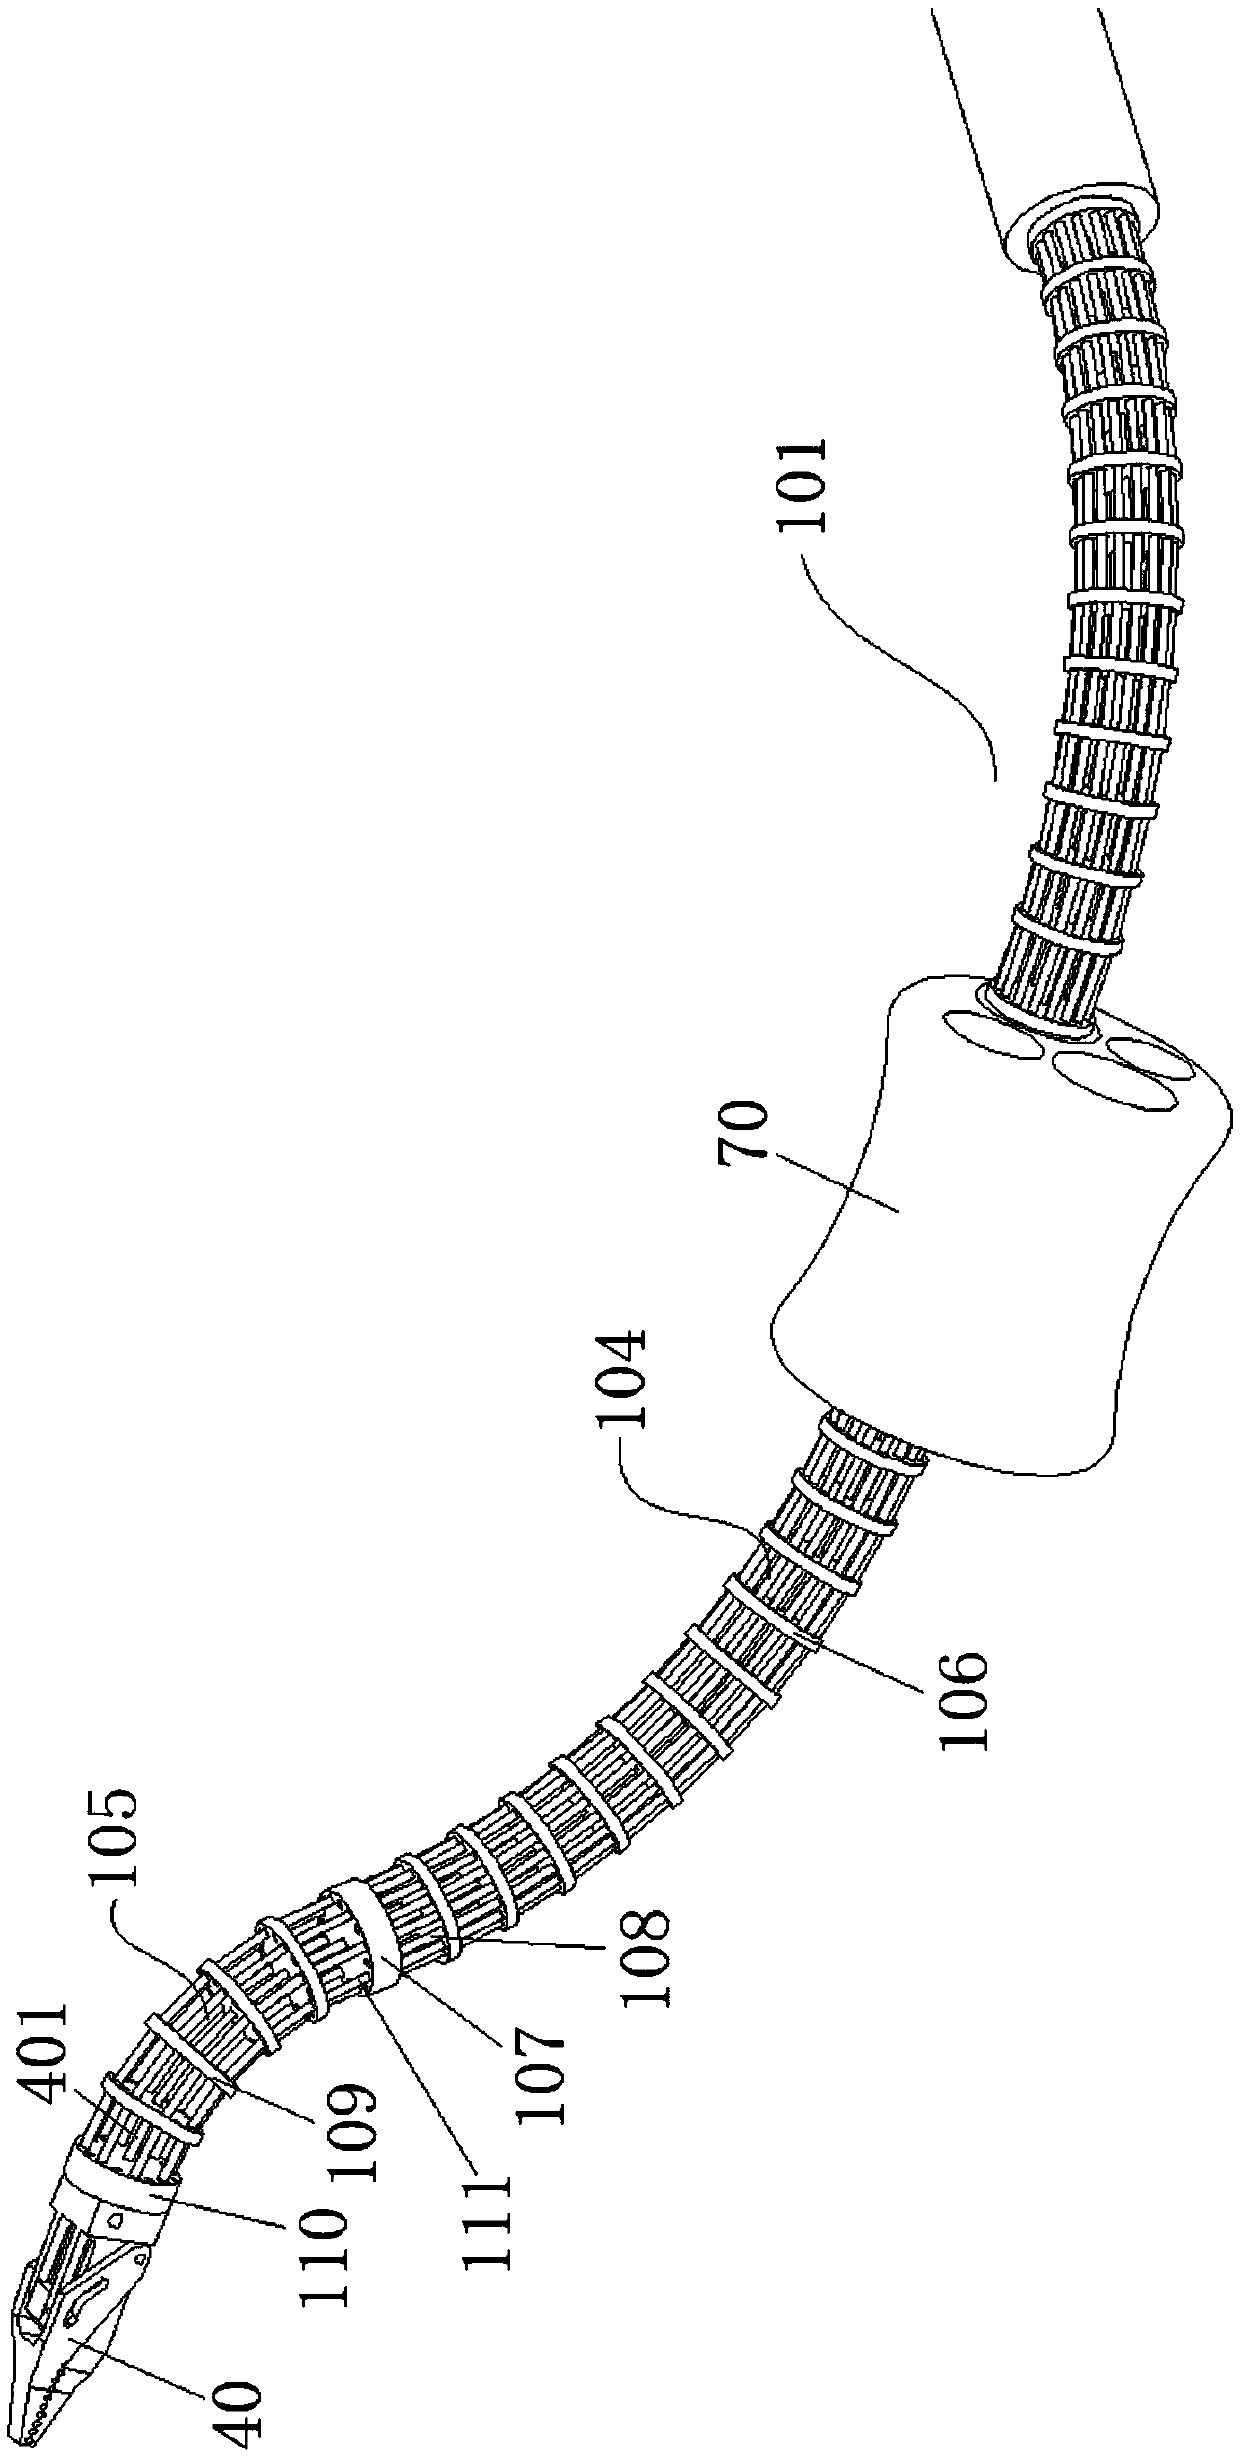 A flexible surgical tool system employing a sterile barrier